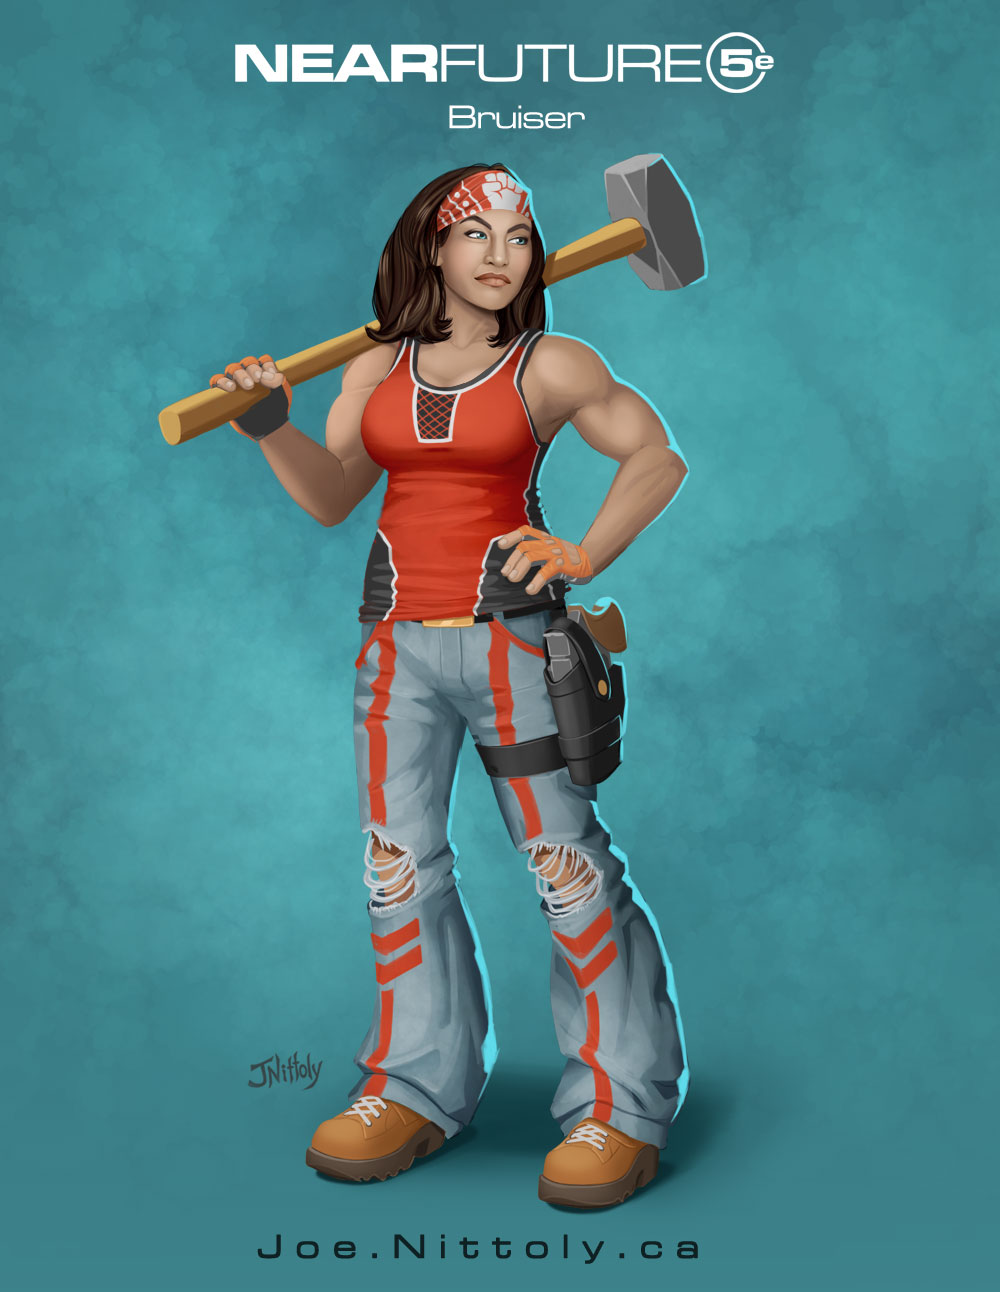 illustration of a strong woman holding a sledge hammer